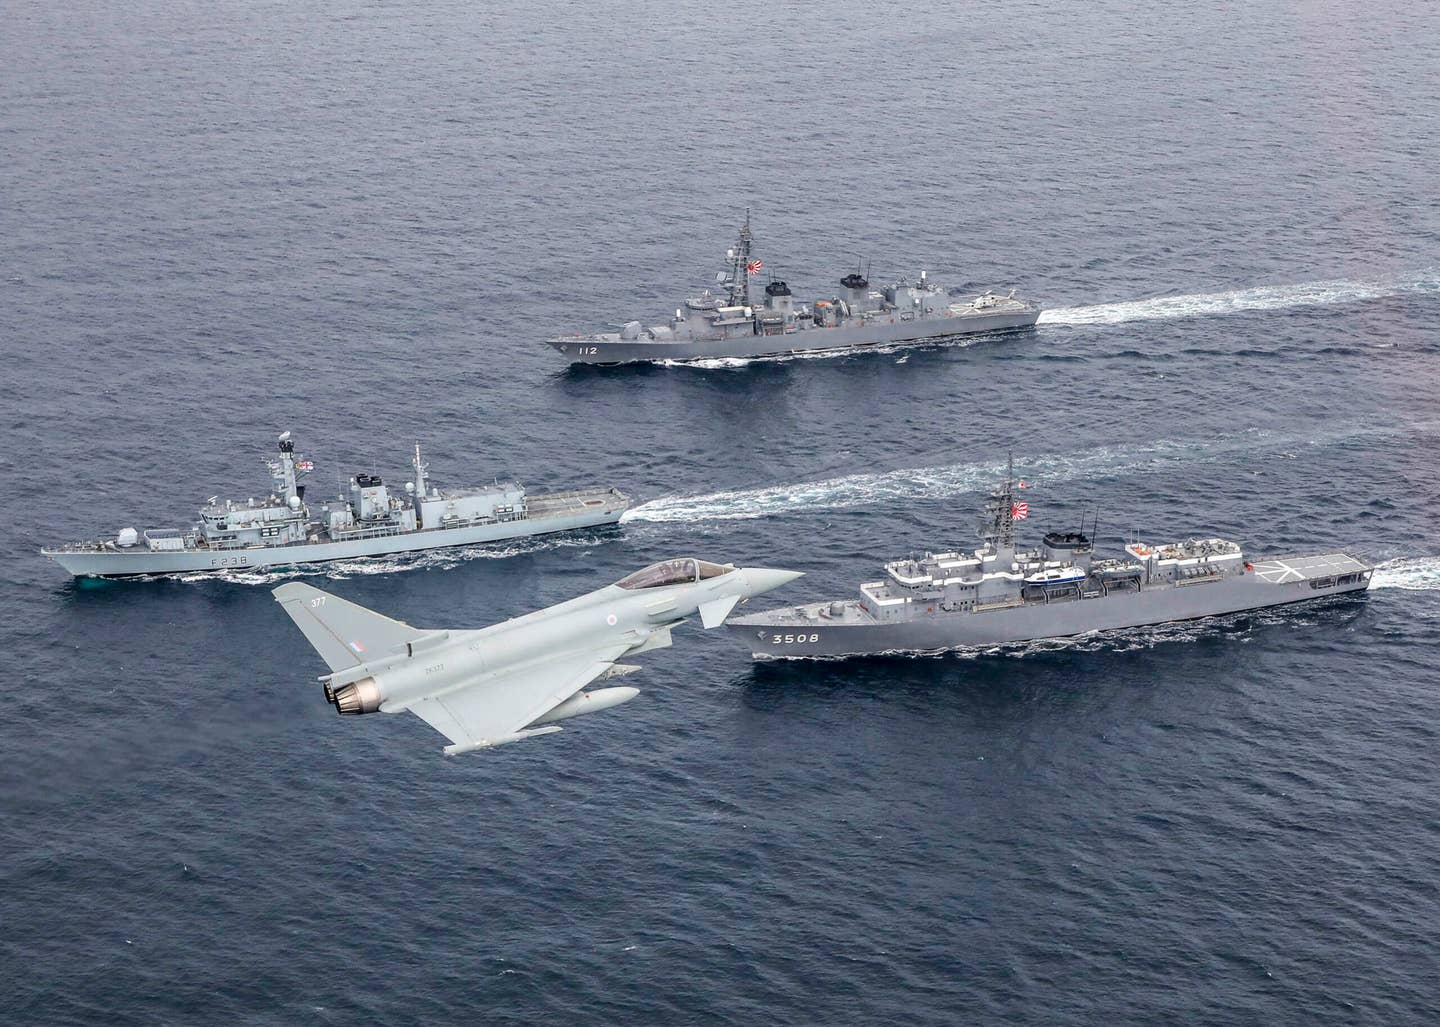 A Typhoon FGR4 from RAF Coningsby flies over a pair of Japan Maritime Self-Defense Force warships accompanied by the Type 23 frigate HMS <em>Northumberland</em> in the North Sea in 2018. <em>Crown Copyright</em>